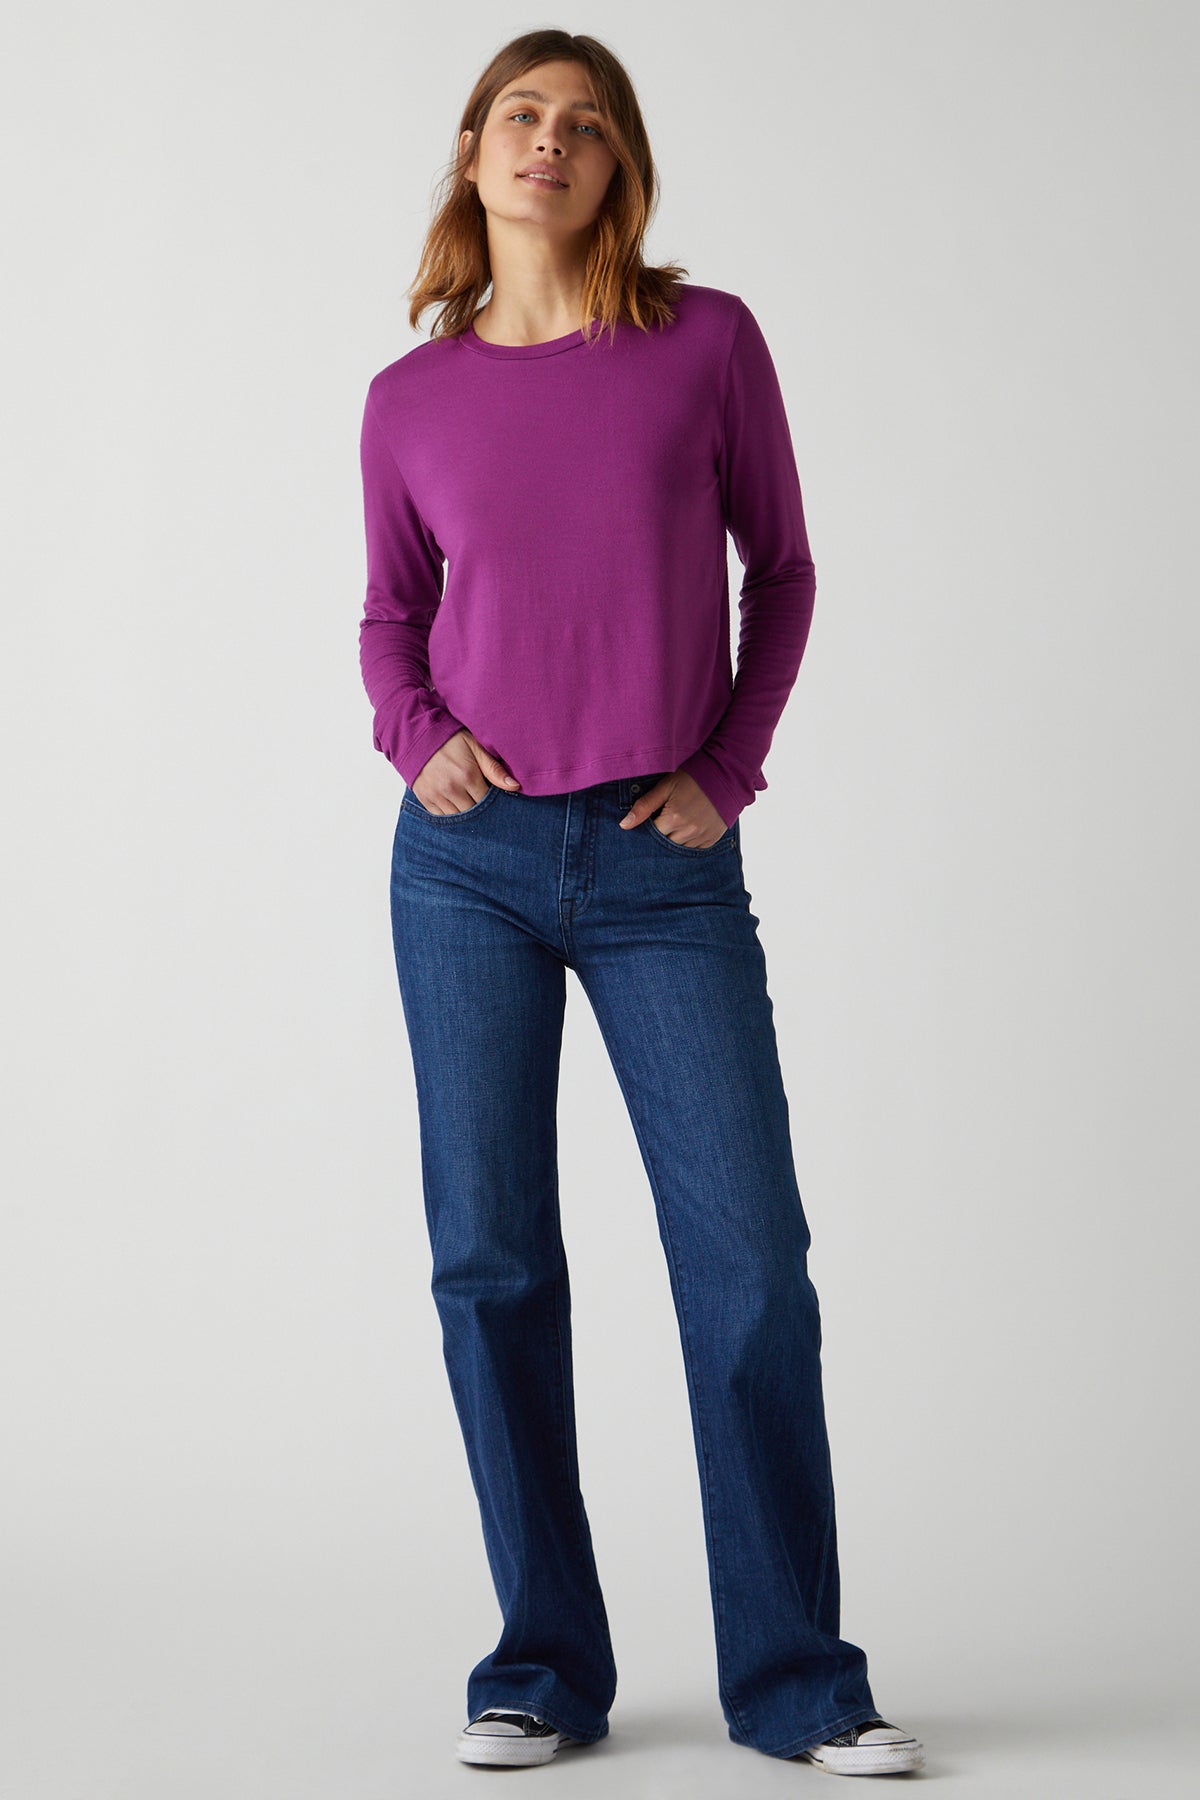 A woman wearing a Pacifica Tee by Velvet by Jenny Graham, a rib knit long-sleeved top in purple, and slim-fit blue jeans.-26413773816001